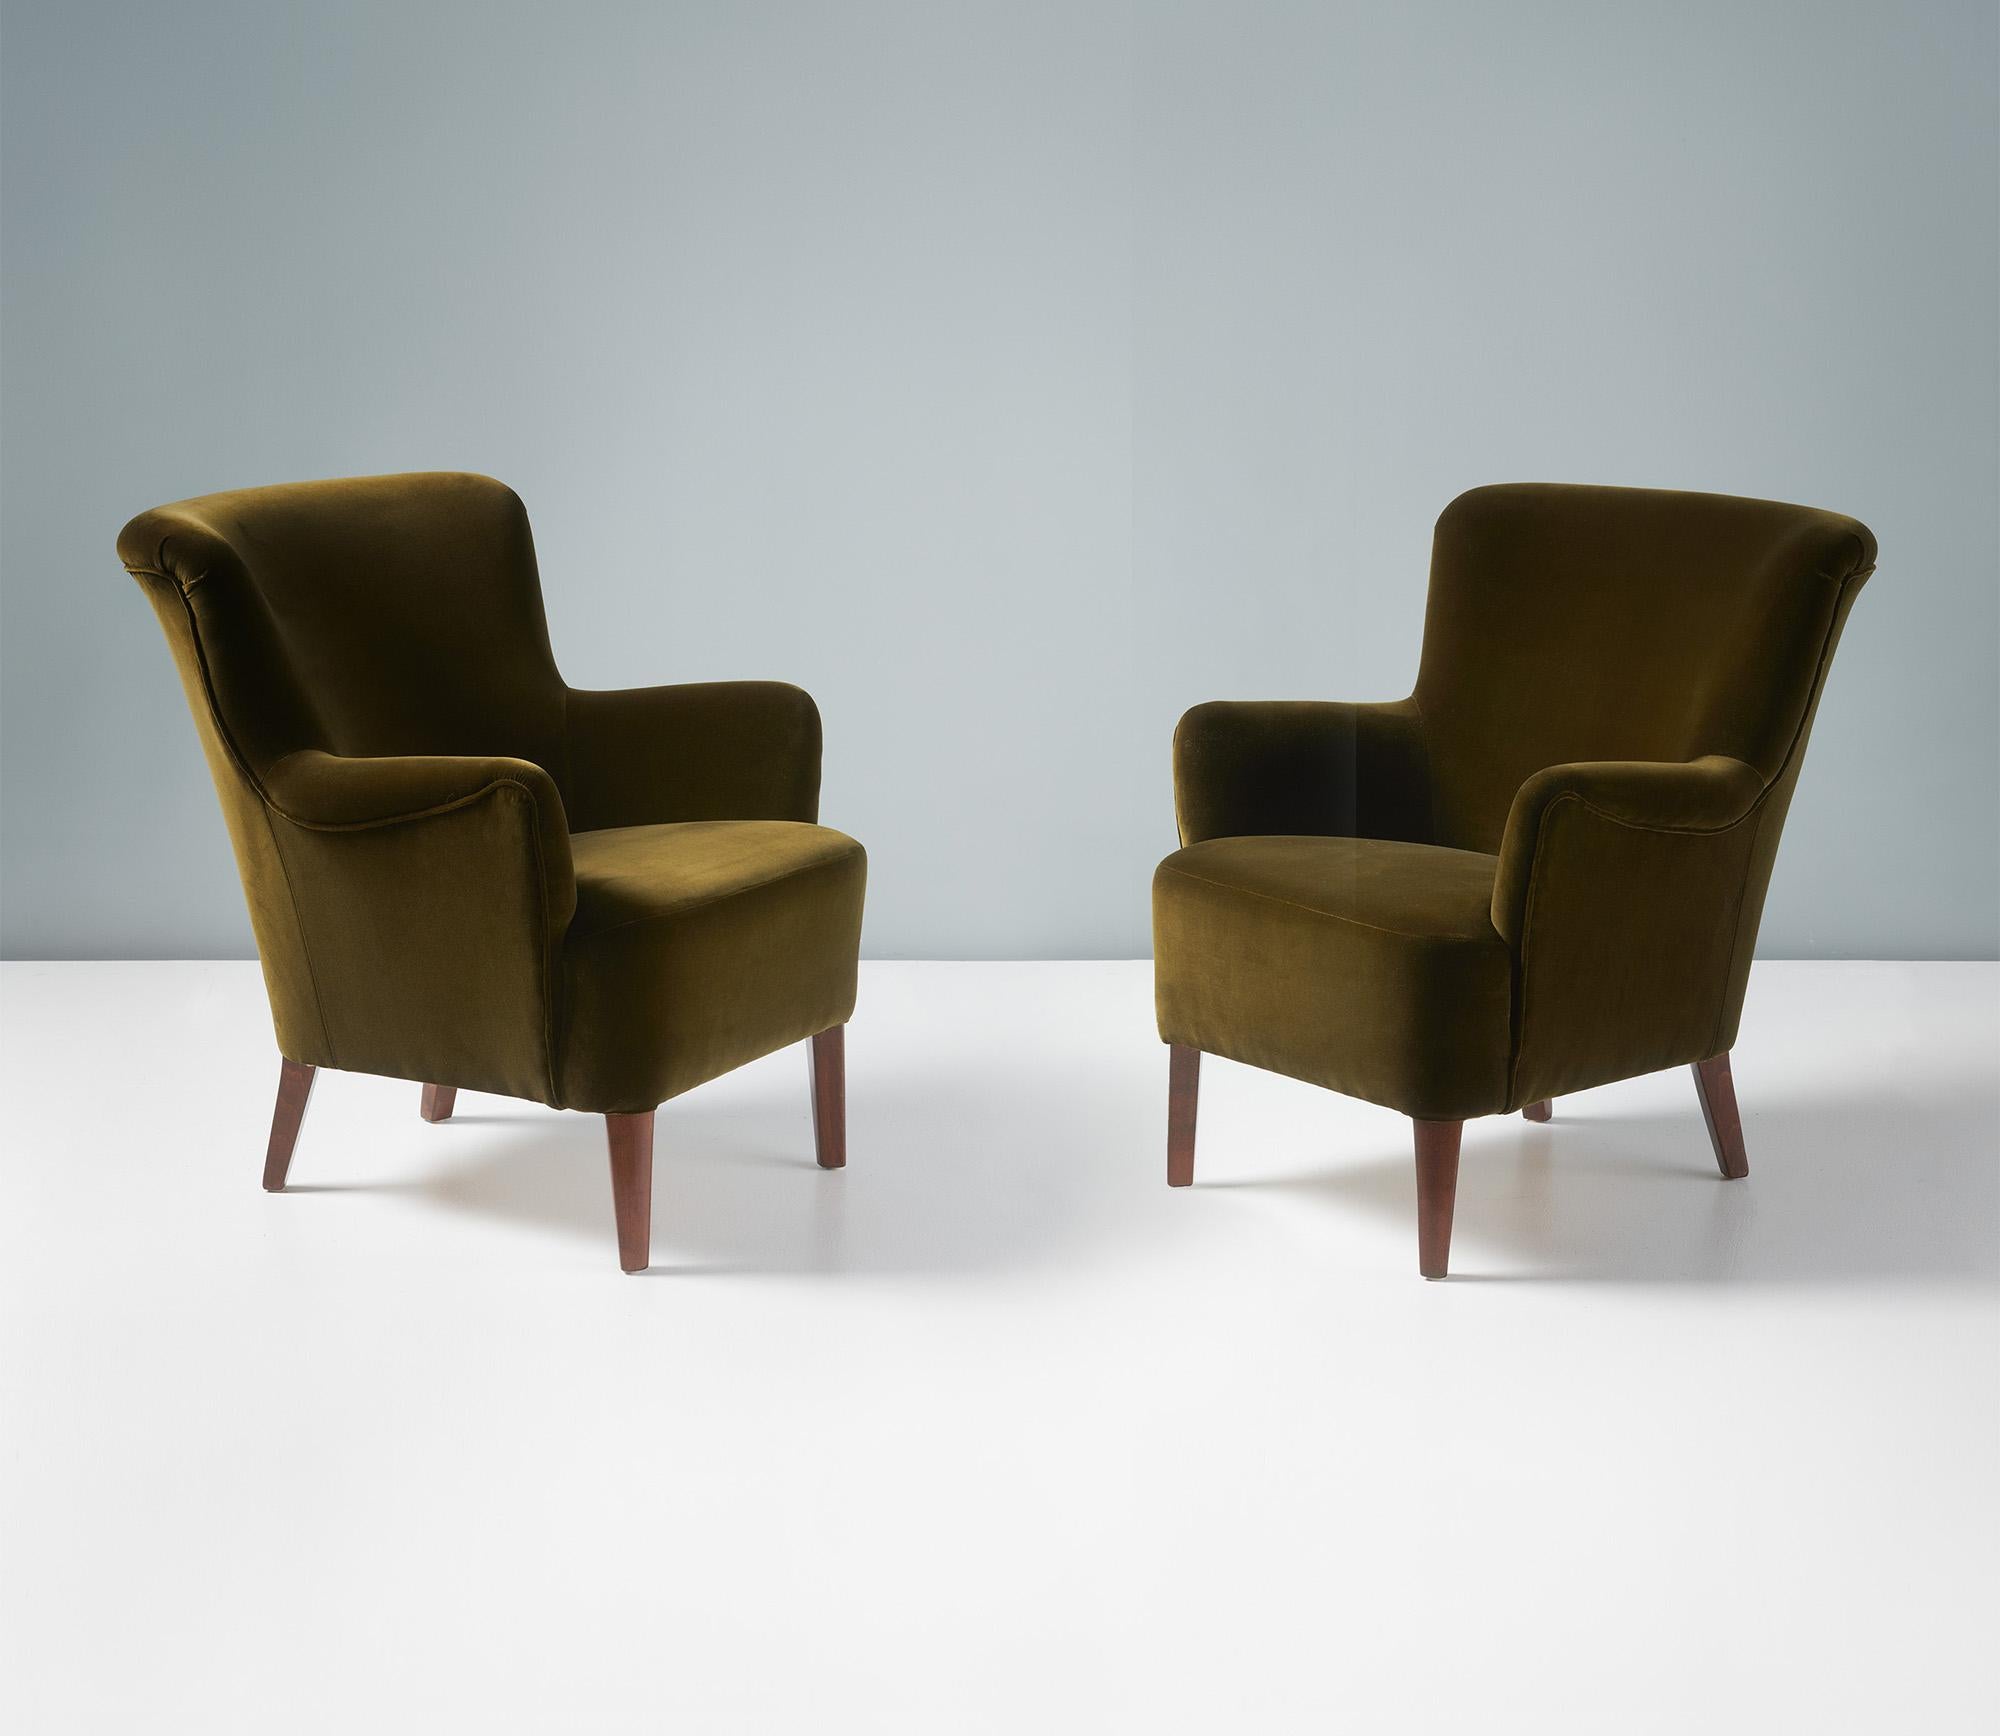 Alfred Kristensen - Pair of Lounge Chairs, circa 1950s.

These elegant lounge chairs were produced by renowned cabinetmakers Slagelse Mobelvaerk in Denmark in the early 1950s and designed by the company's owner: Alfred Kristensen. The beech legs